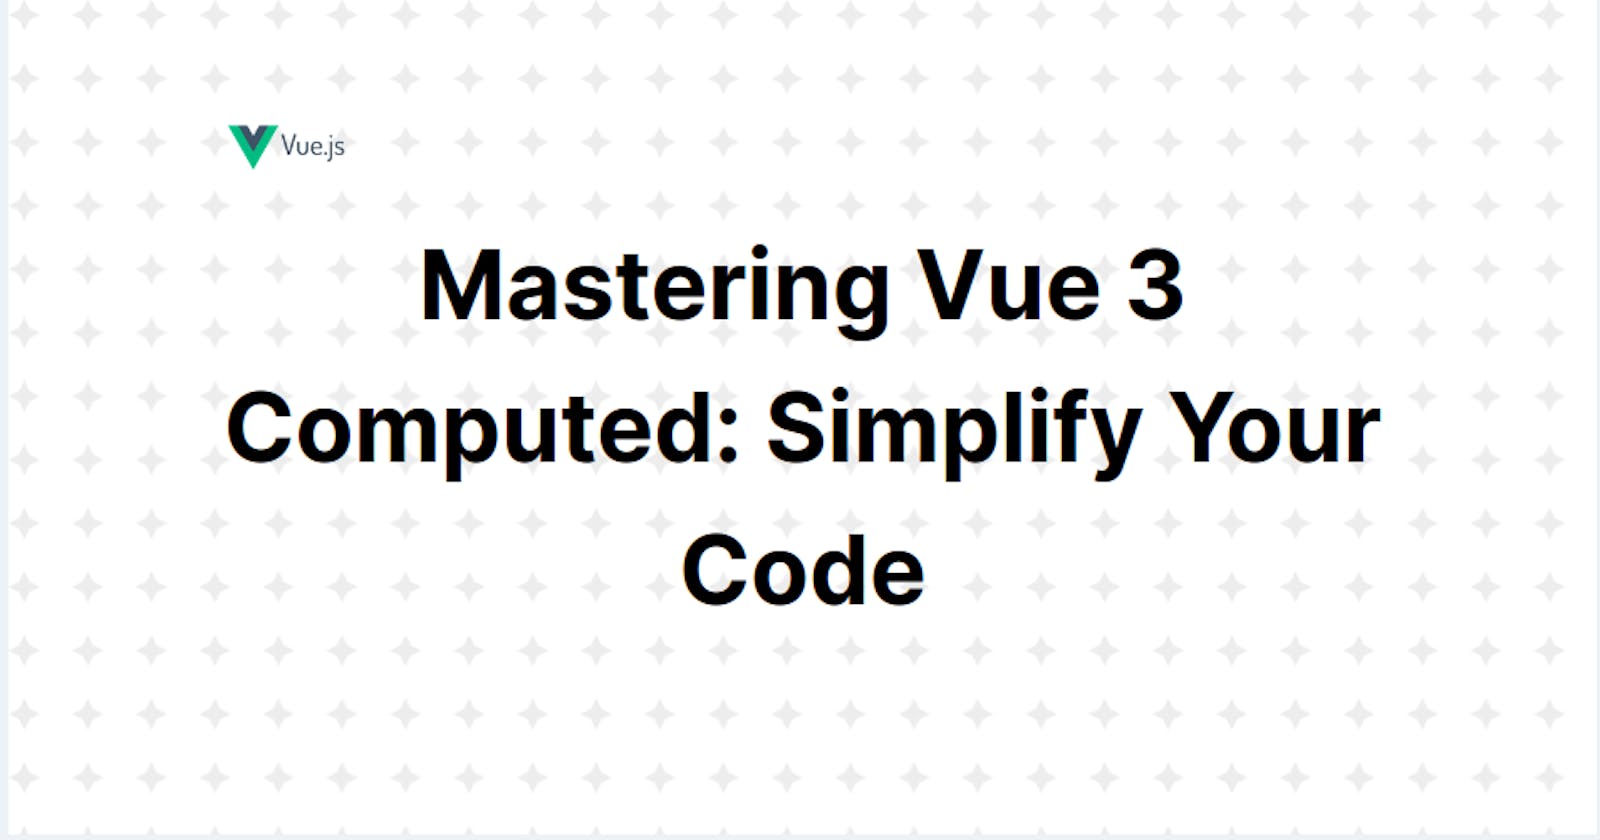 Mastering Vue 3 Computed: Simplify Your Code